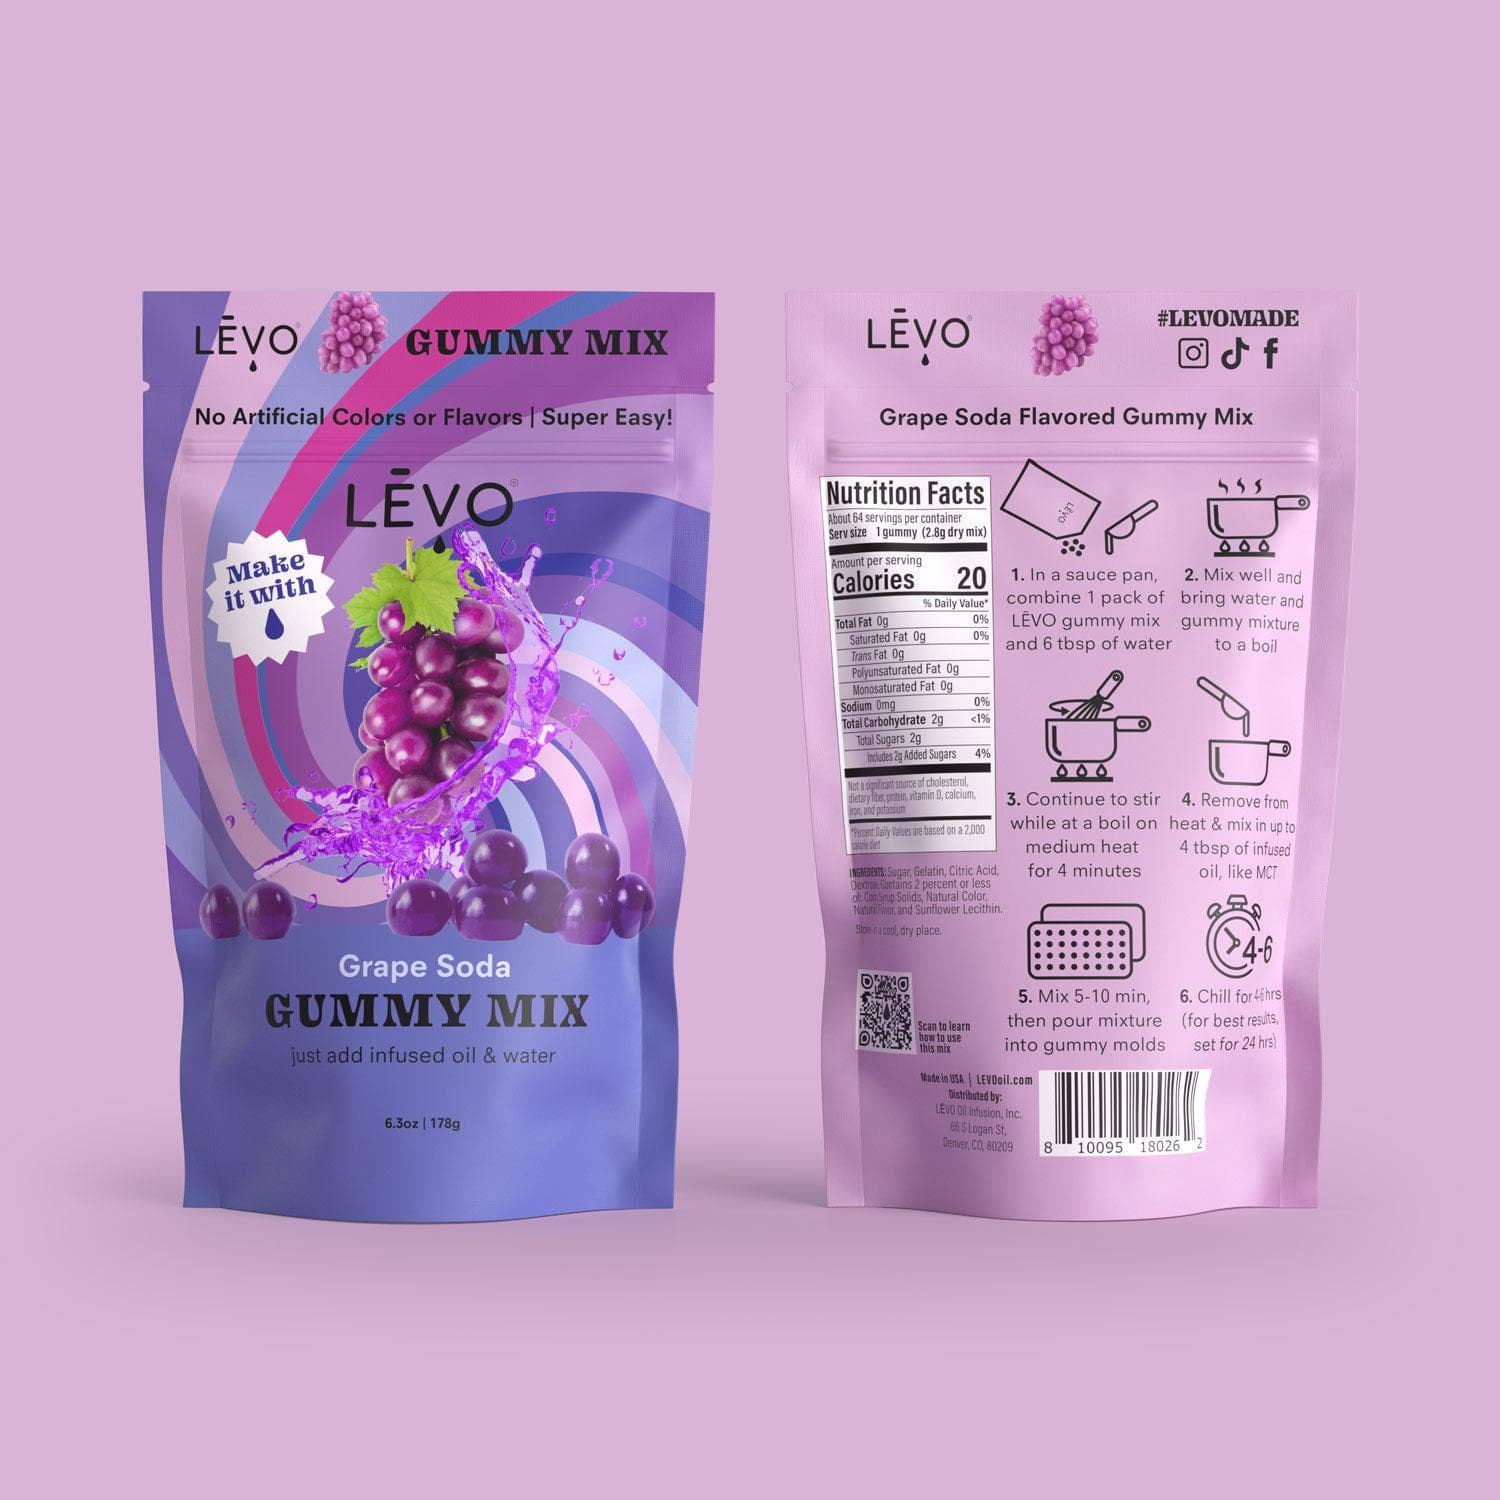 Grape Soda all natural gummy mix ingredients and nutrition facts, to make your own infused edibles with your LEVO machine. 